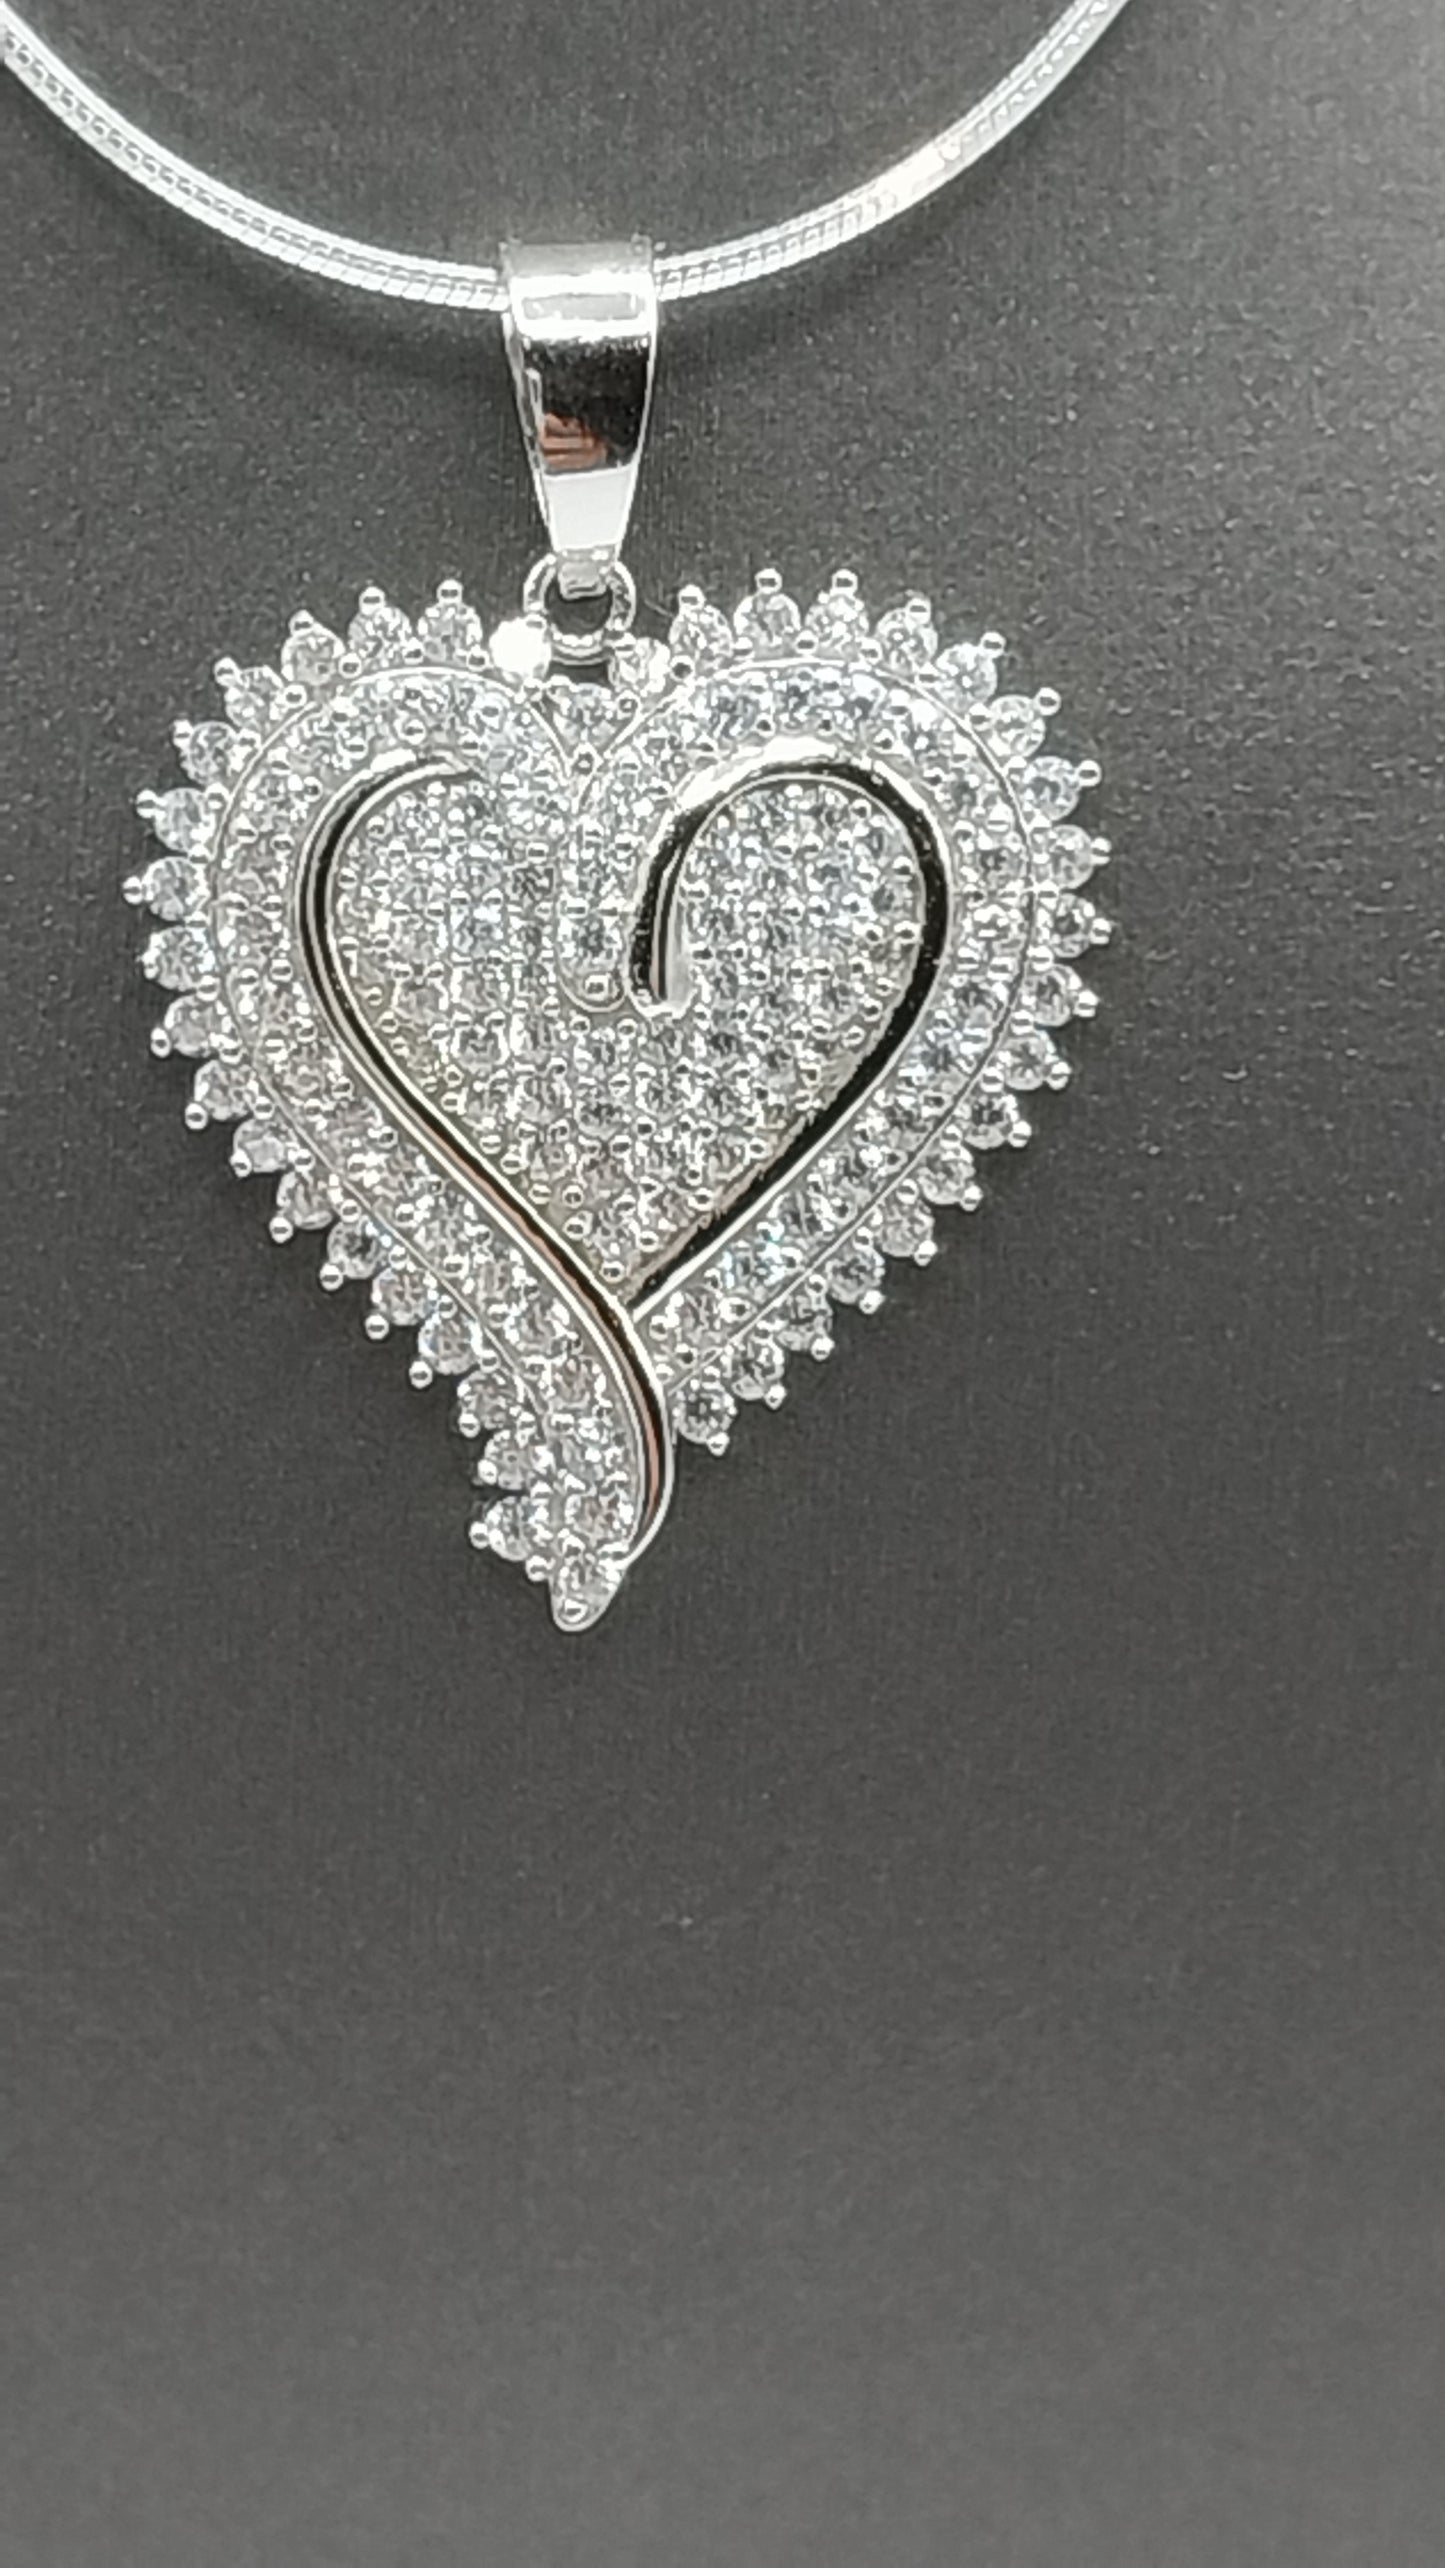 Heart Shape Necklace with Cubic Zirconia Stones and Snake Style Chain